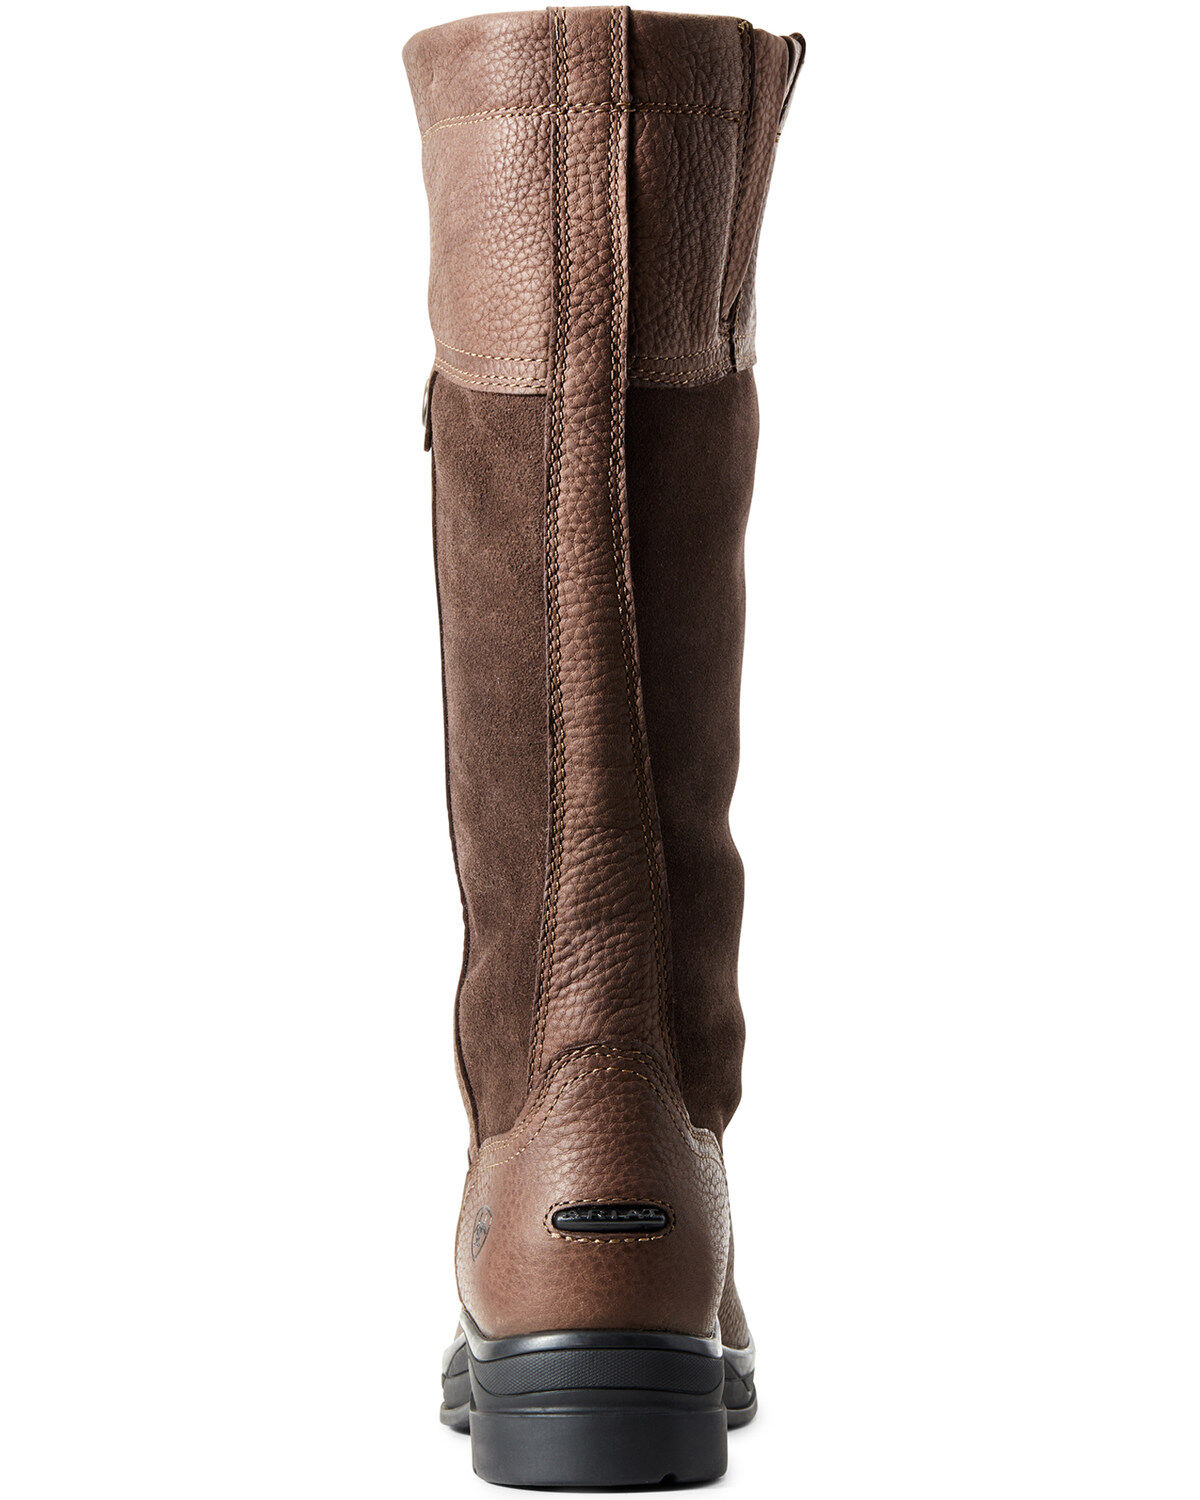 womens round toe riding boots